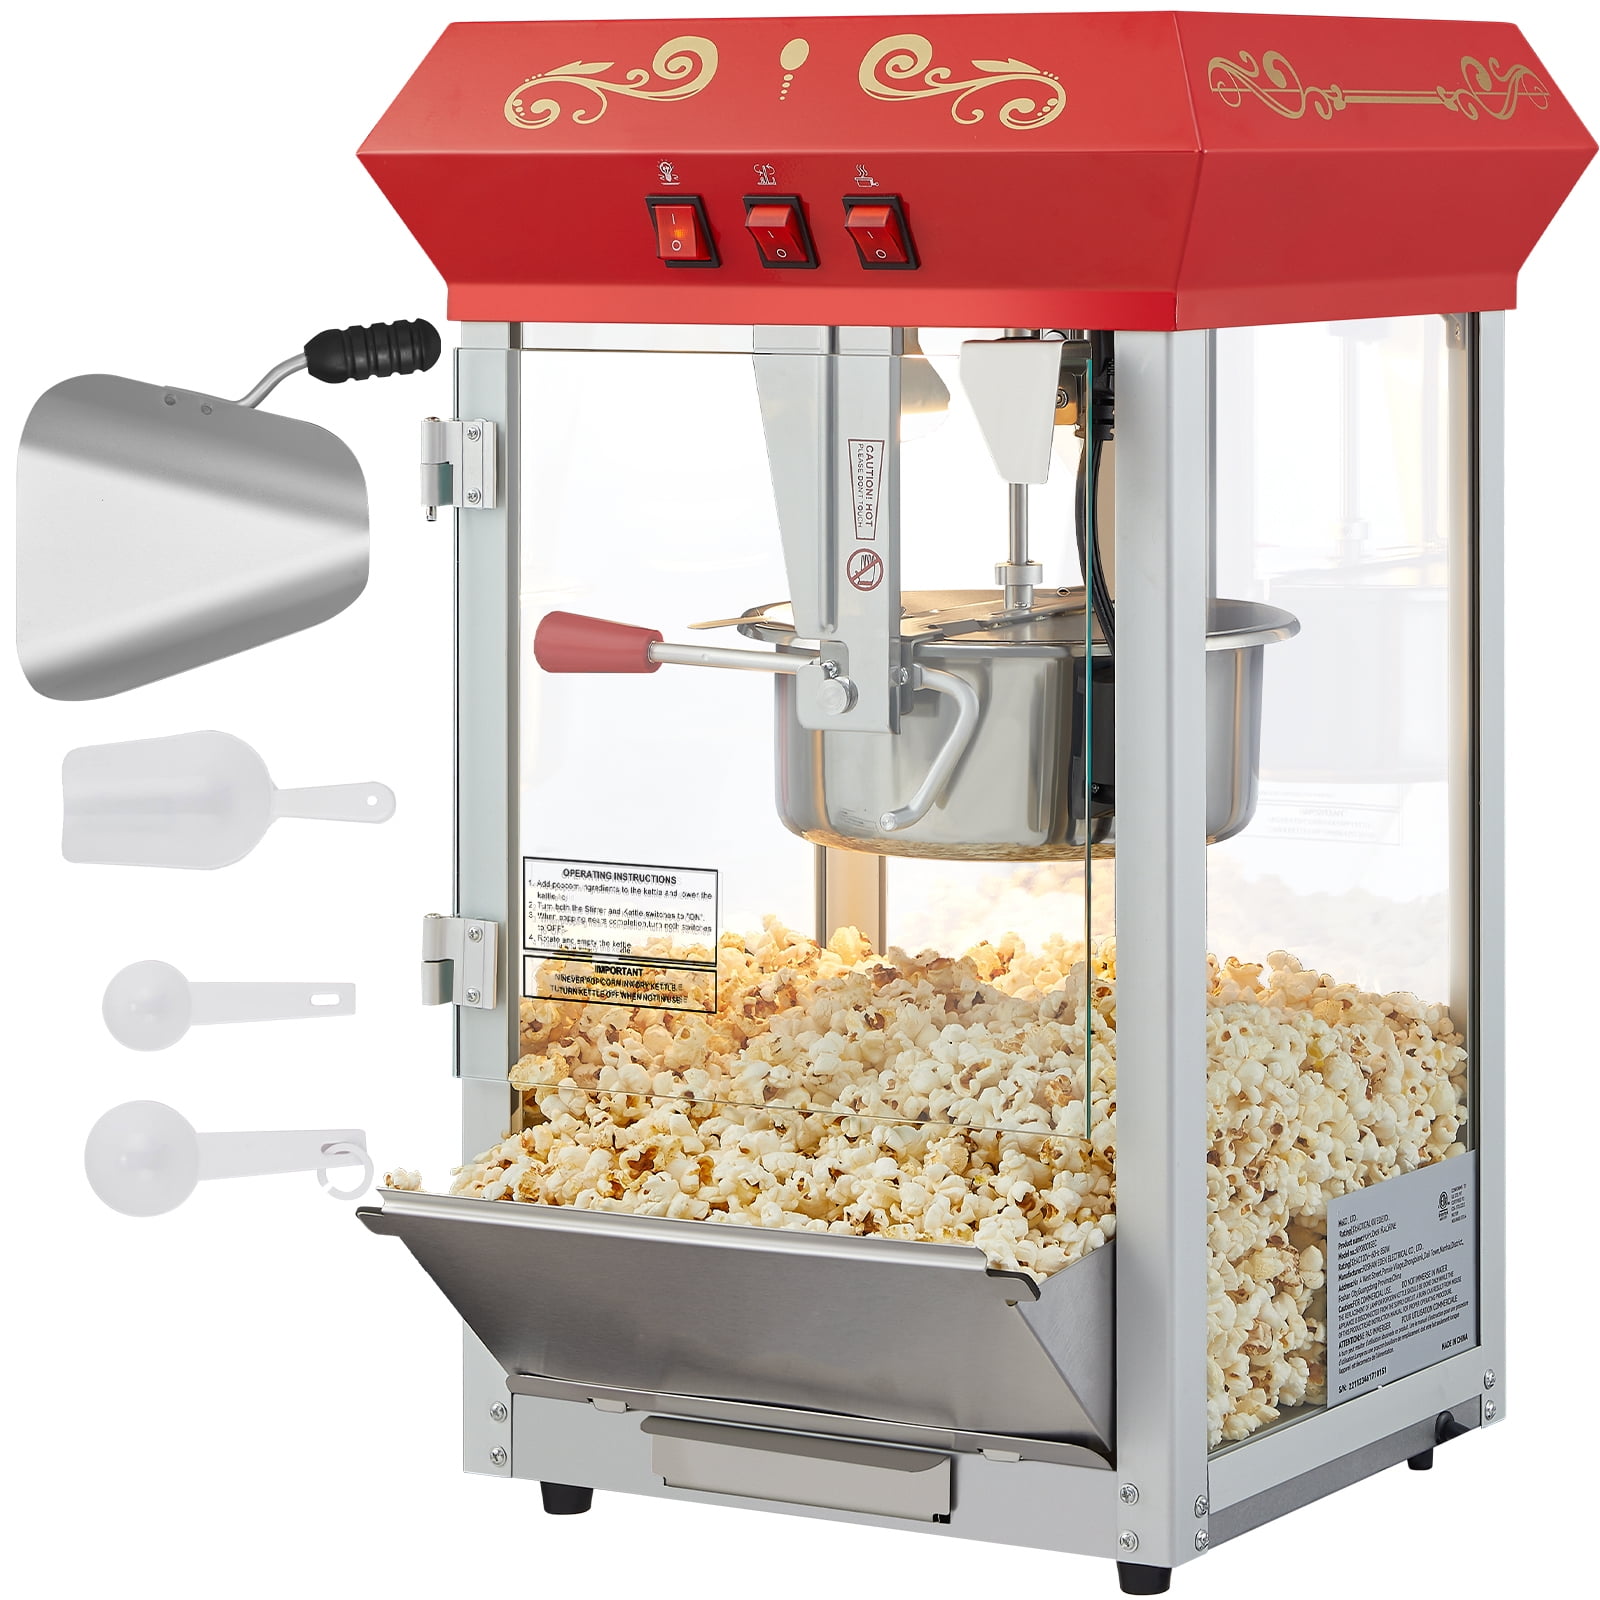 ZOETOUCH Popcorn Popper Machine 1200W Electric Hot Air Popcorn Maker with  Measuring Cup & Butter Melting Tray, High Popping Rate, 2 Min Fast Making